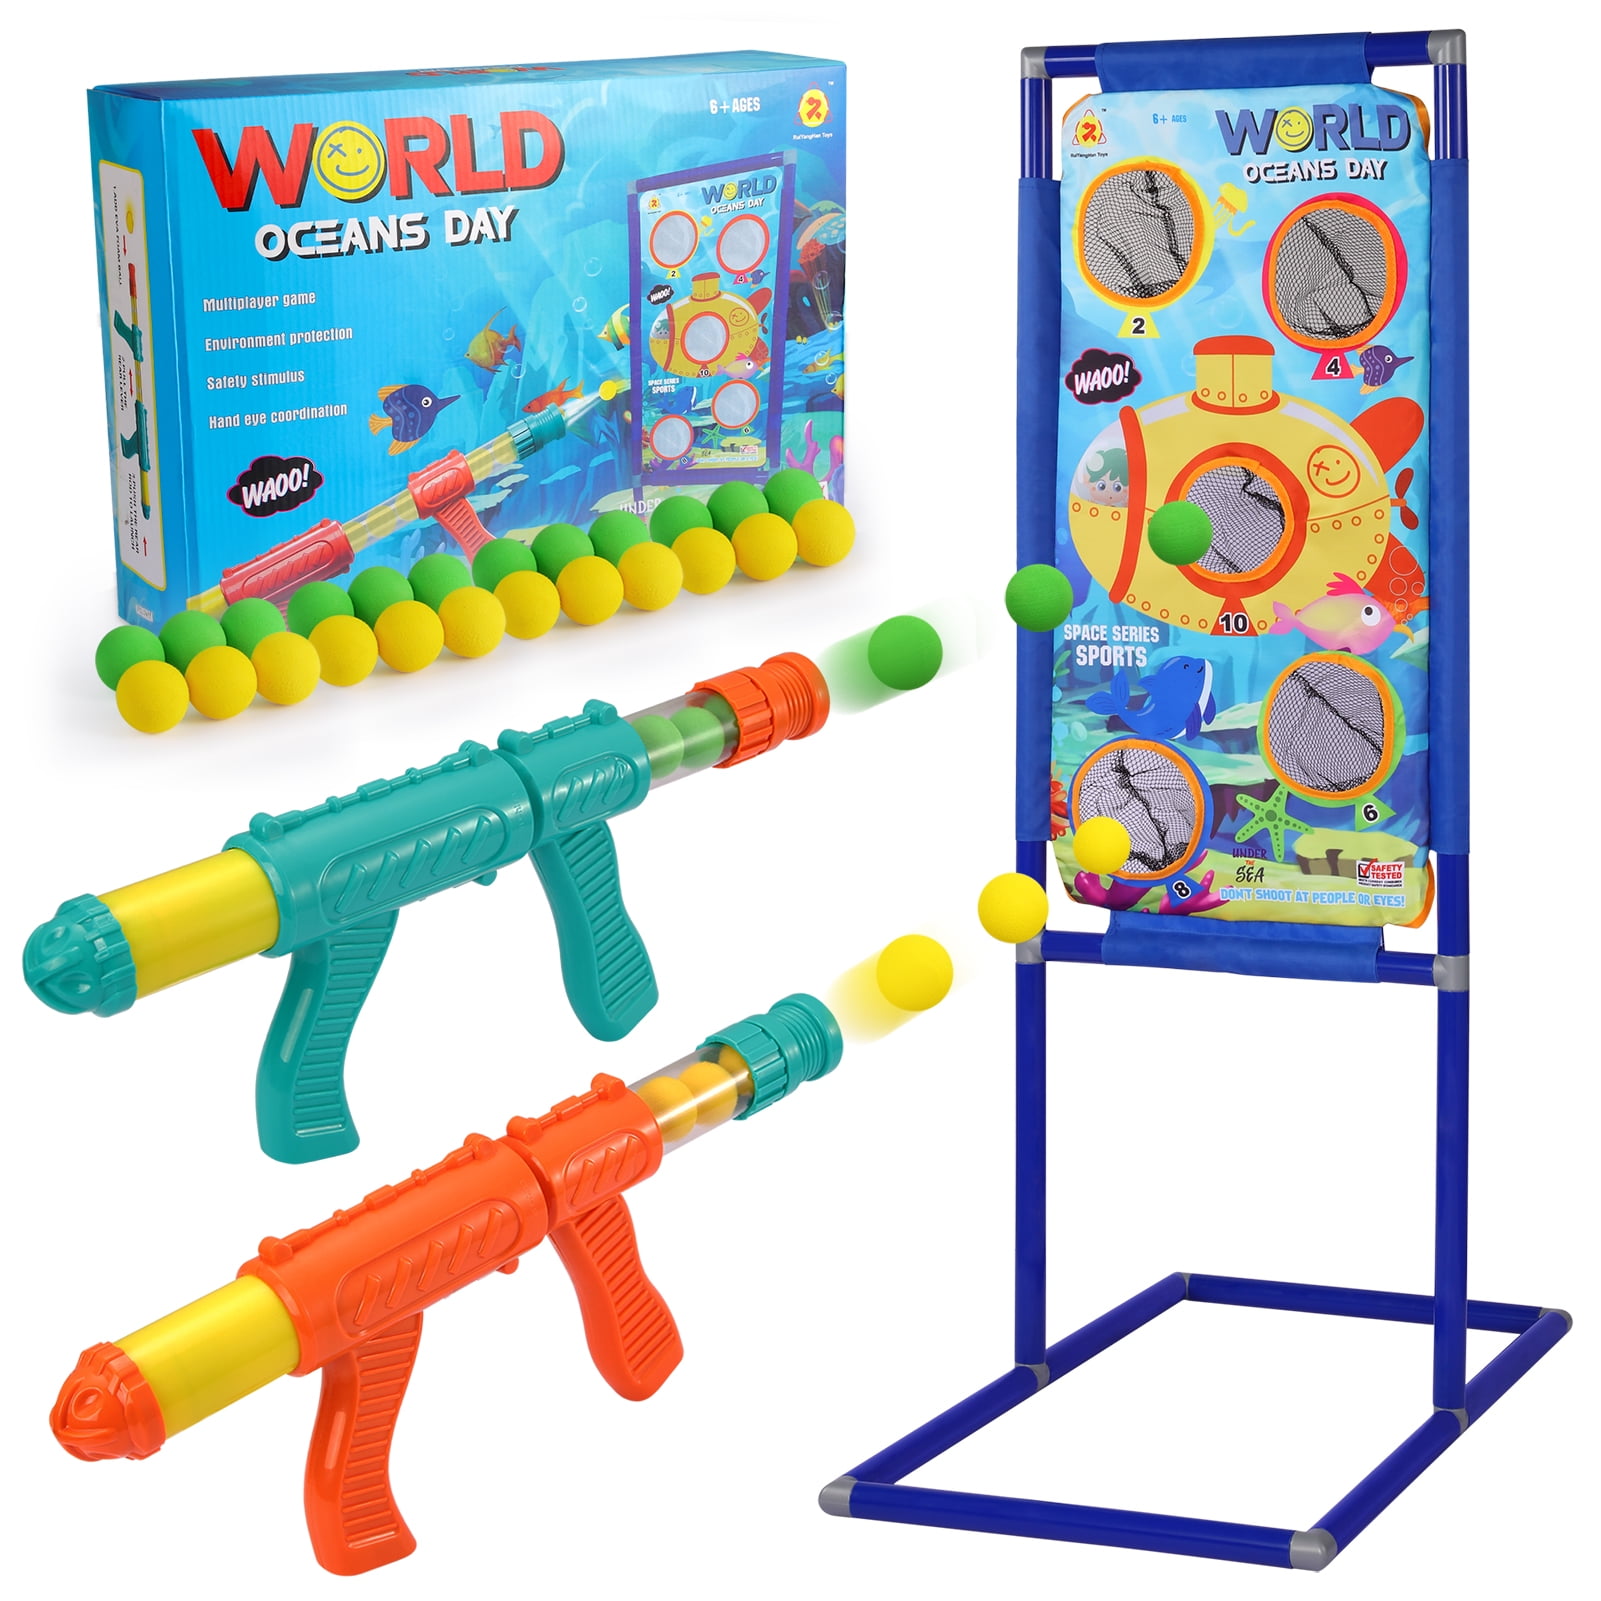 [2023 New] Toy Gun for Age 5 6 7 8 9 10 Years Old Boys Girls, Best Kid  Shooting Game Toys with Moving Shooting Target 2 Popper Air Guns 48 Foam  Balls